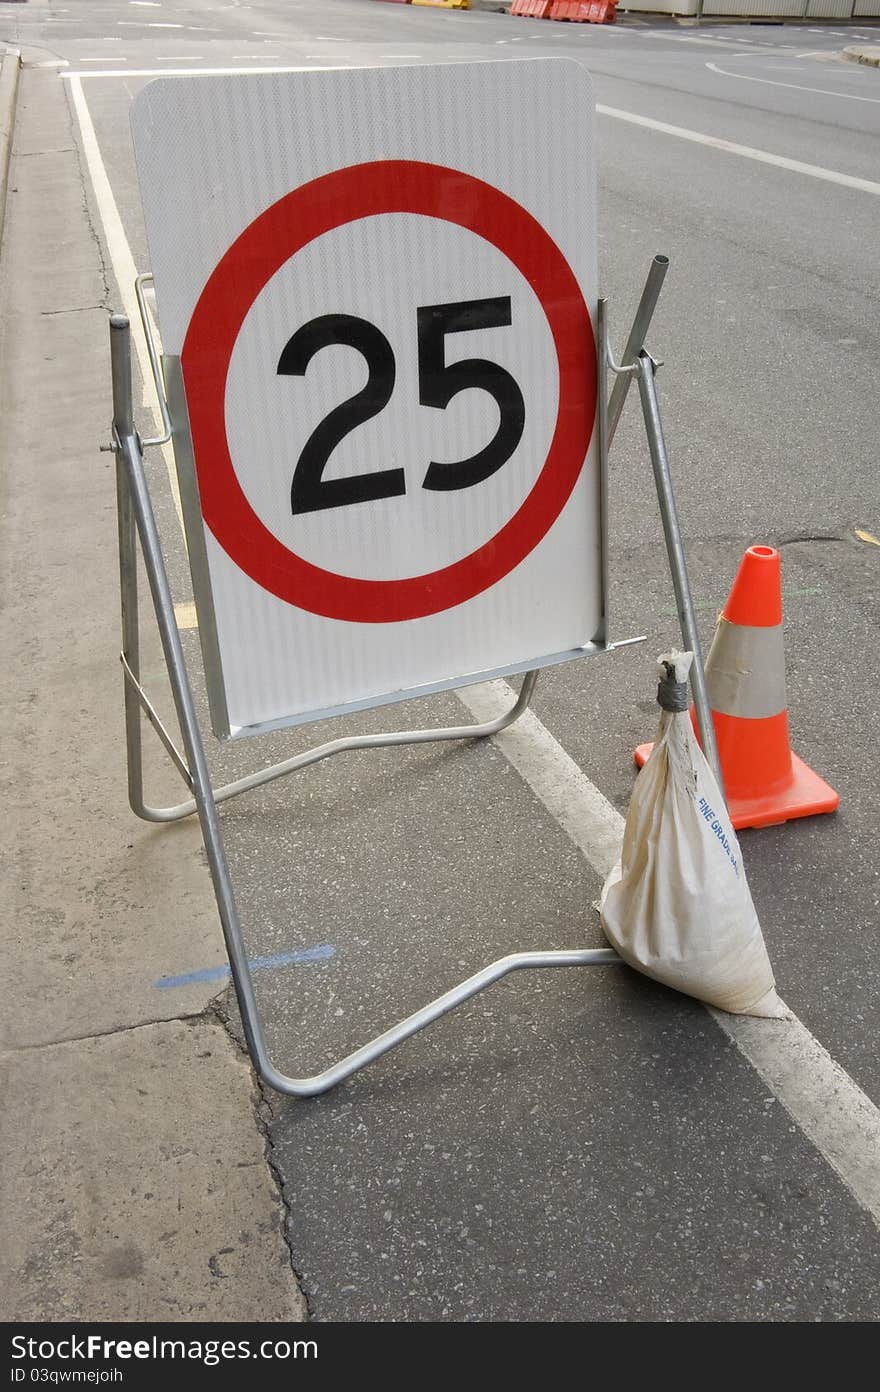 Common speed limit for vehicles in australia around schools and construction areas